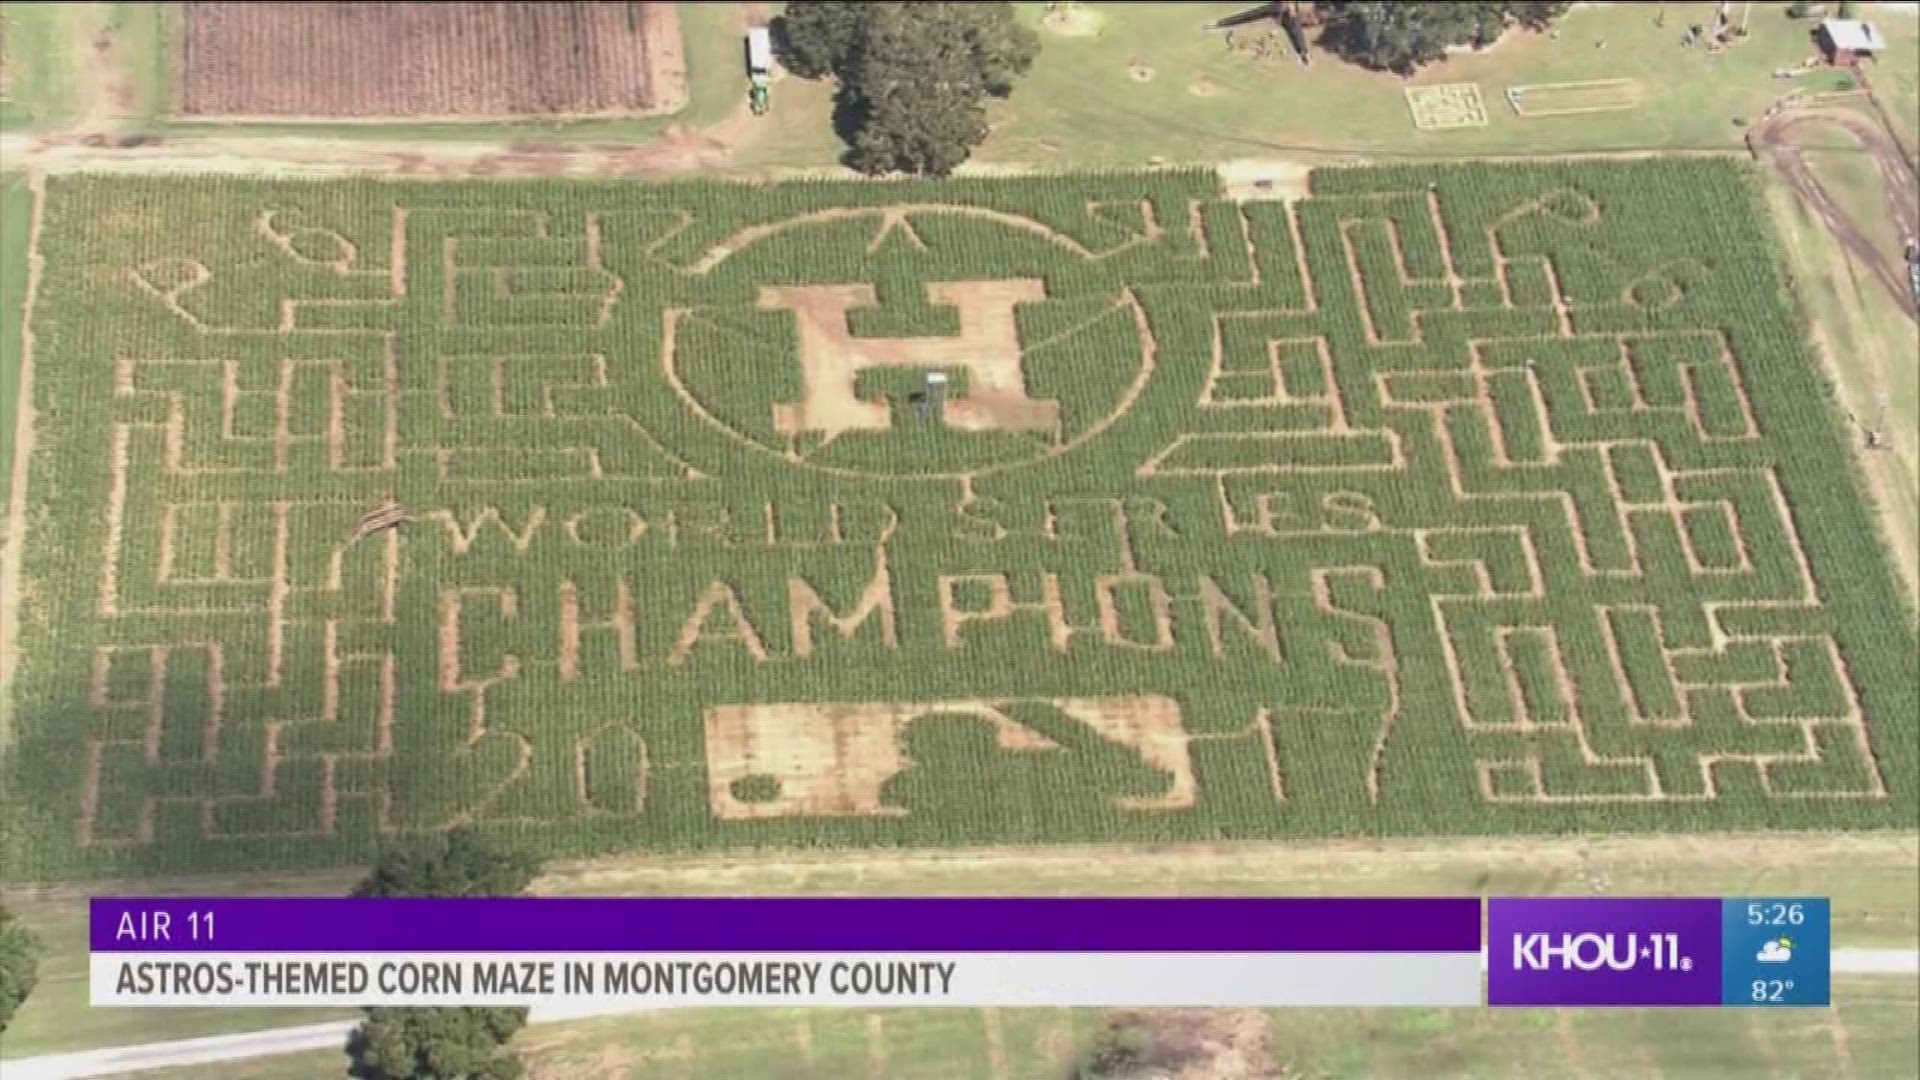 Astros fans are excited about Houston's ALCS matchup with the Boston Red Sox. But perhaps no one is as excited as the fan who created this incredible corn maze.